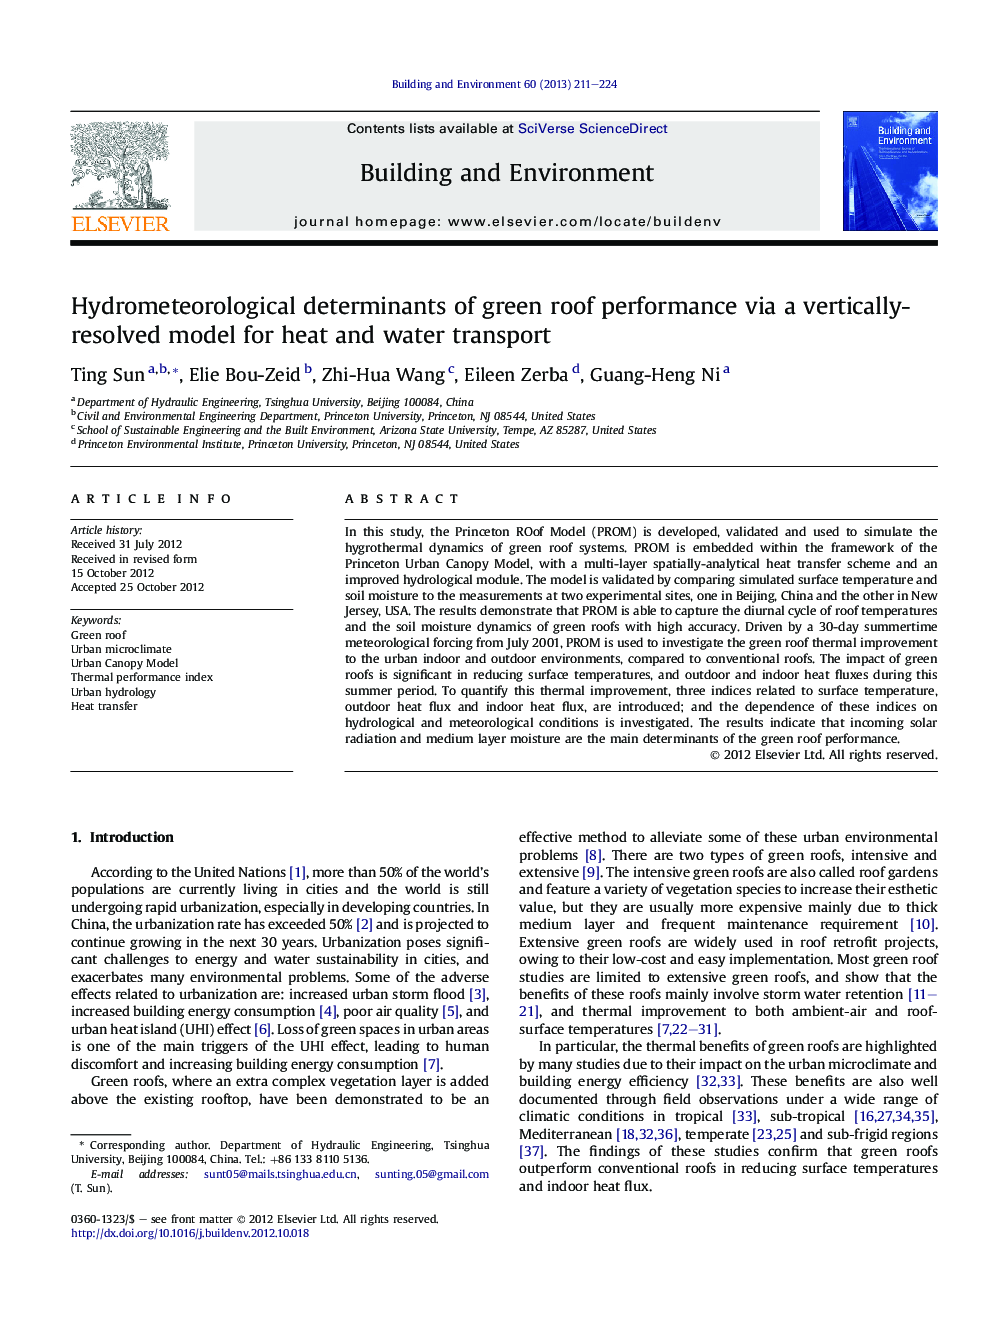 Hydrometeorological determinants of green roof performance via a vertically-resolved model for heat and water transport